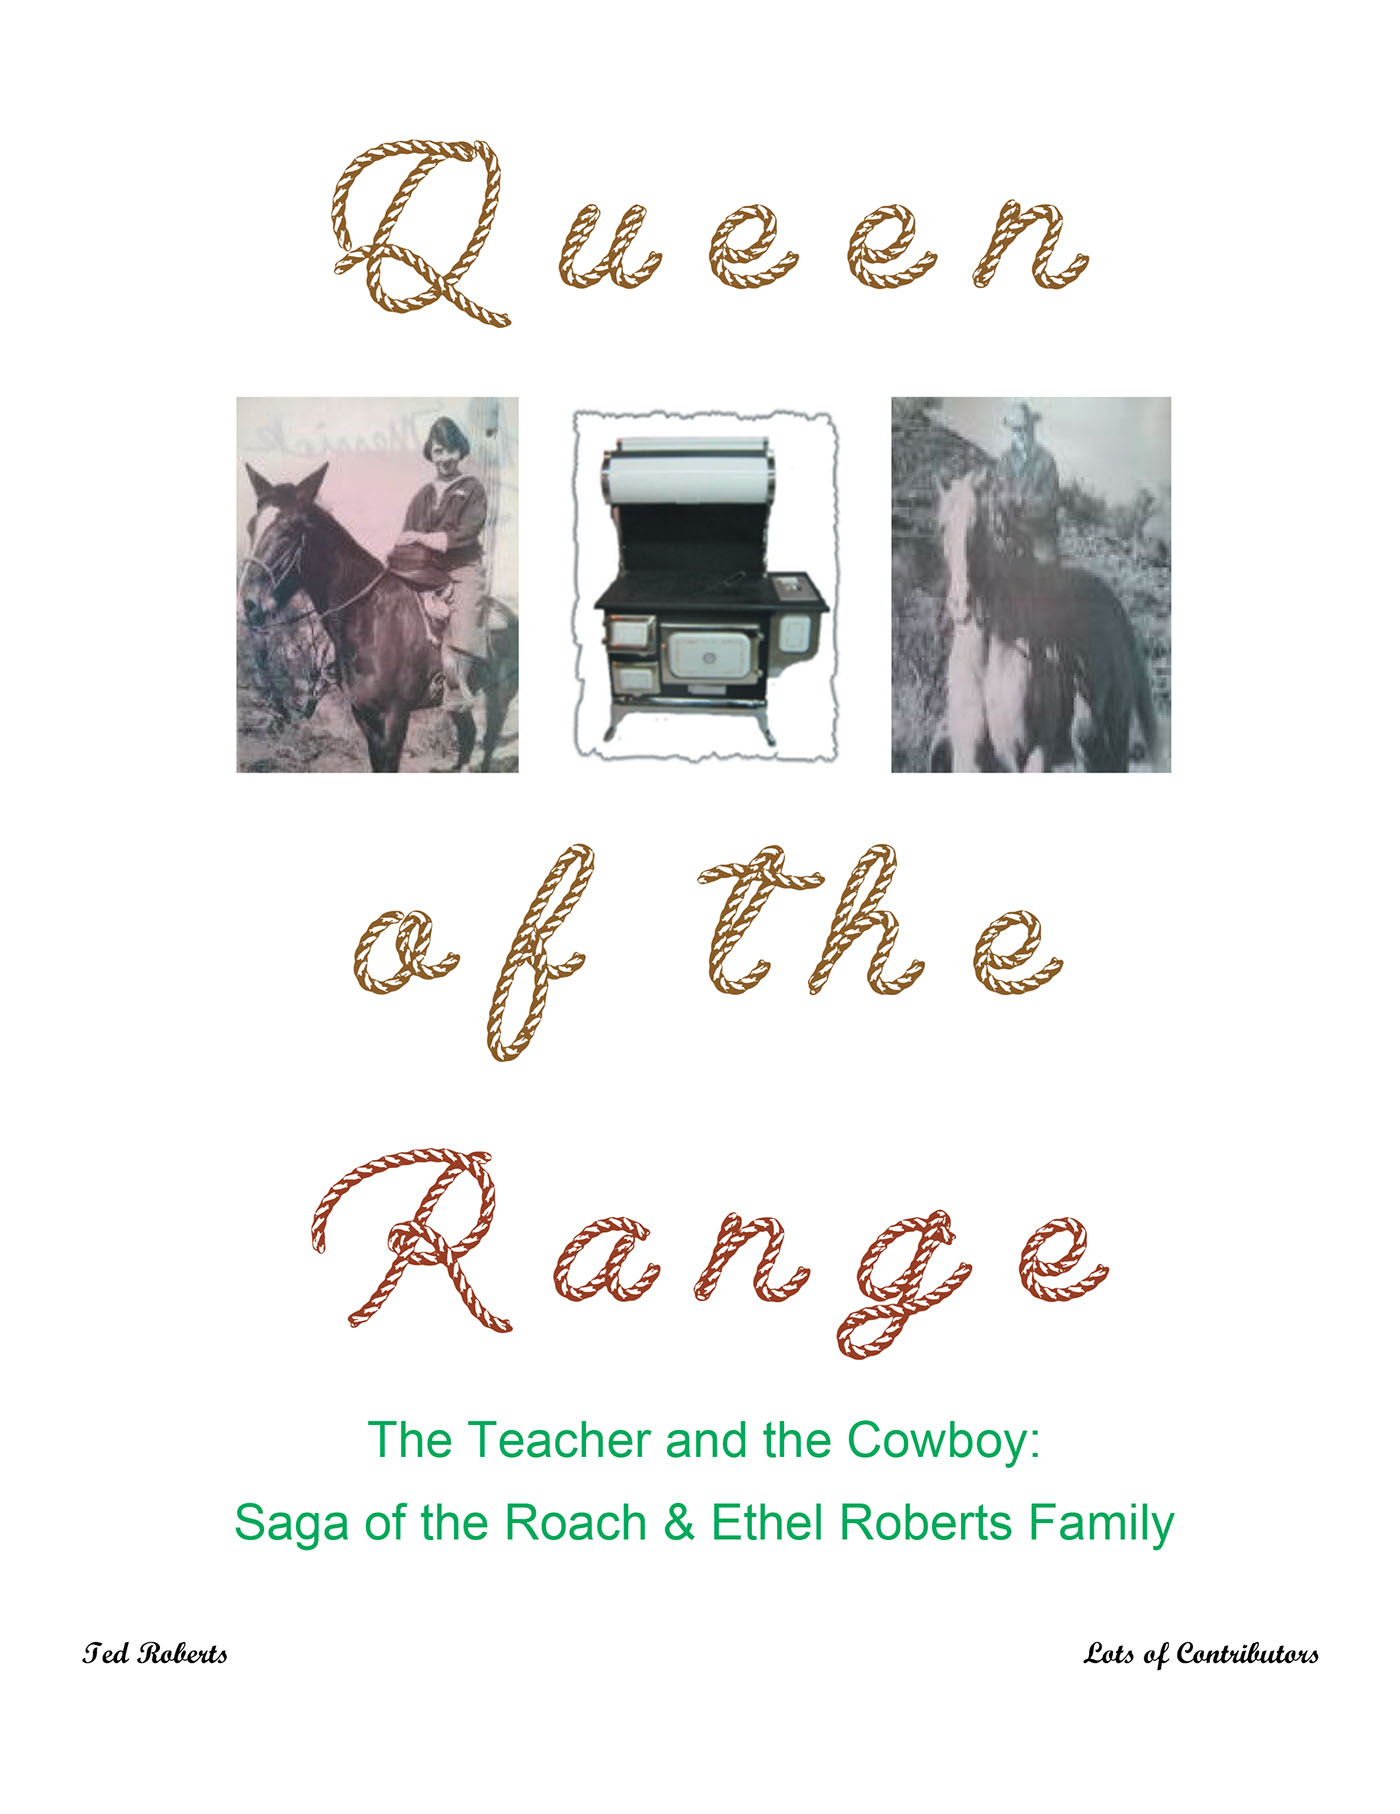 Ted Roberts’s Newly Released "Queen of the Range: The Teacher and the Cowboy: Saga of the Roach & Ethel Roberts Family" is an Engaging Family History